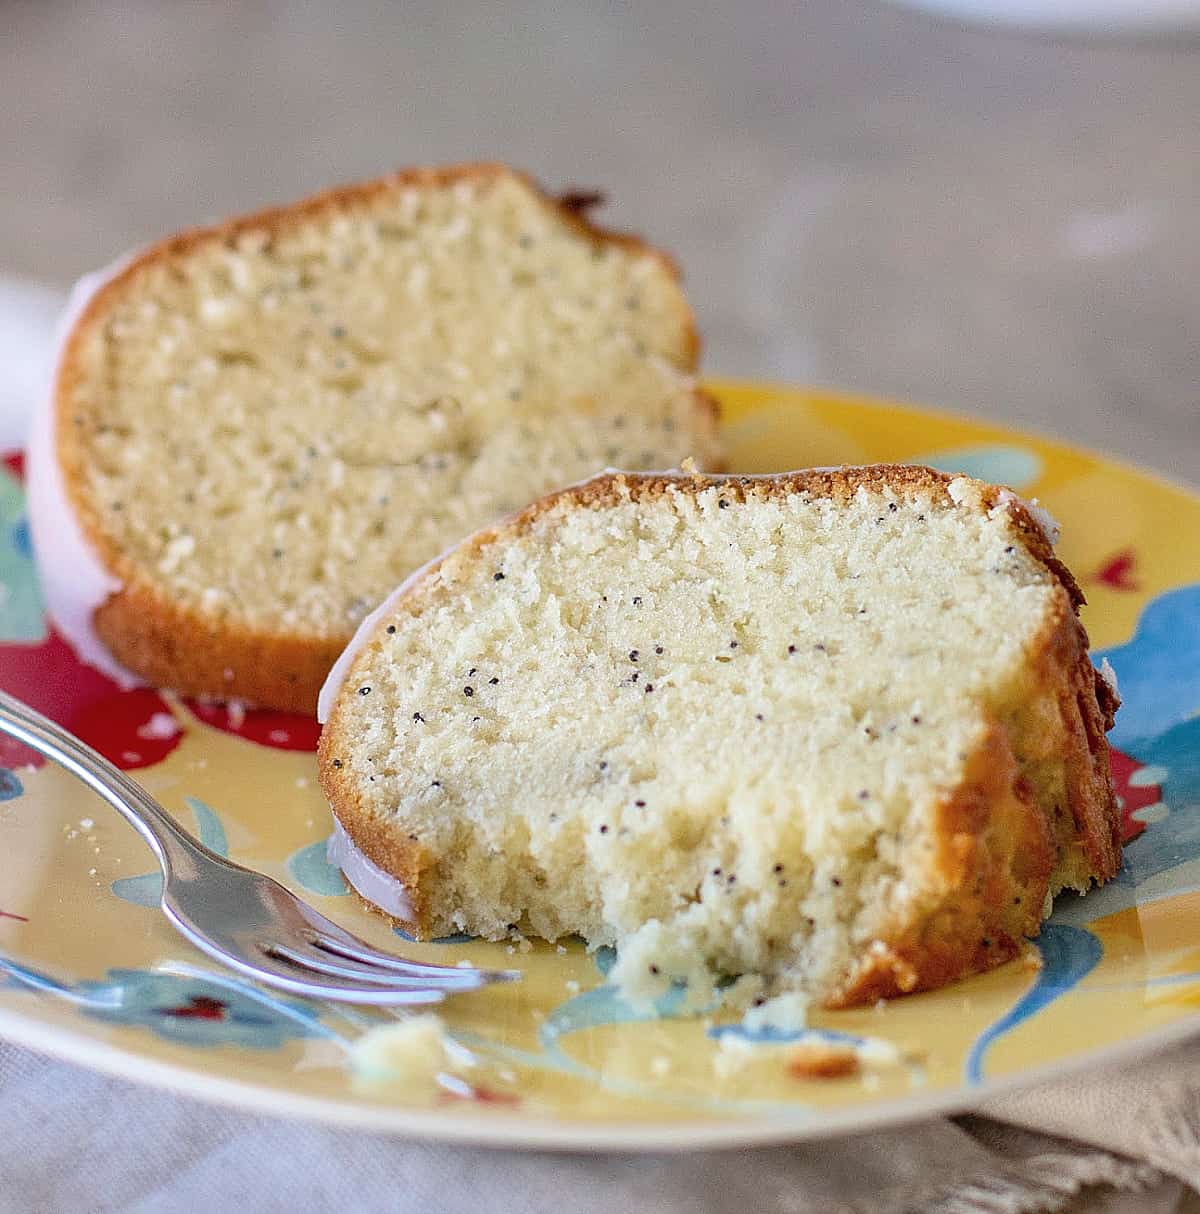 Close-up of slices of poppy seed bundt cake on a colorful plate, a silver fork, grey surface